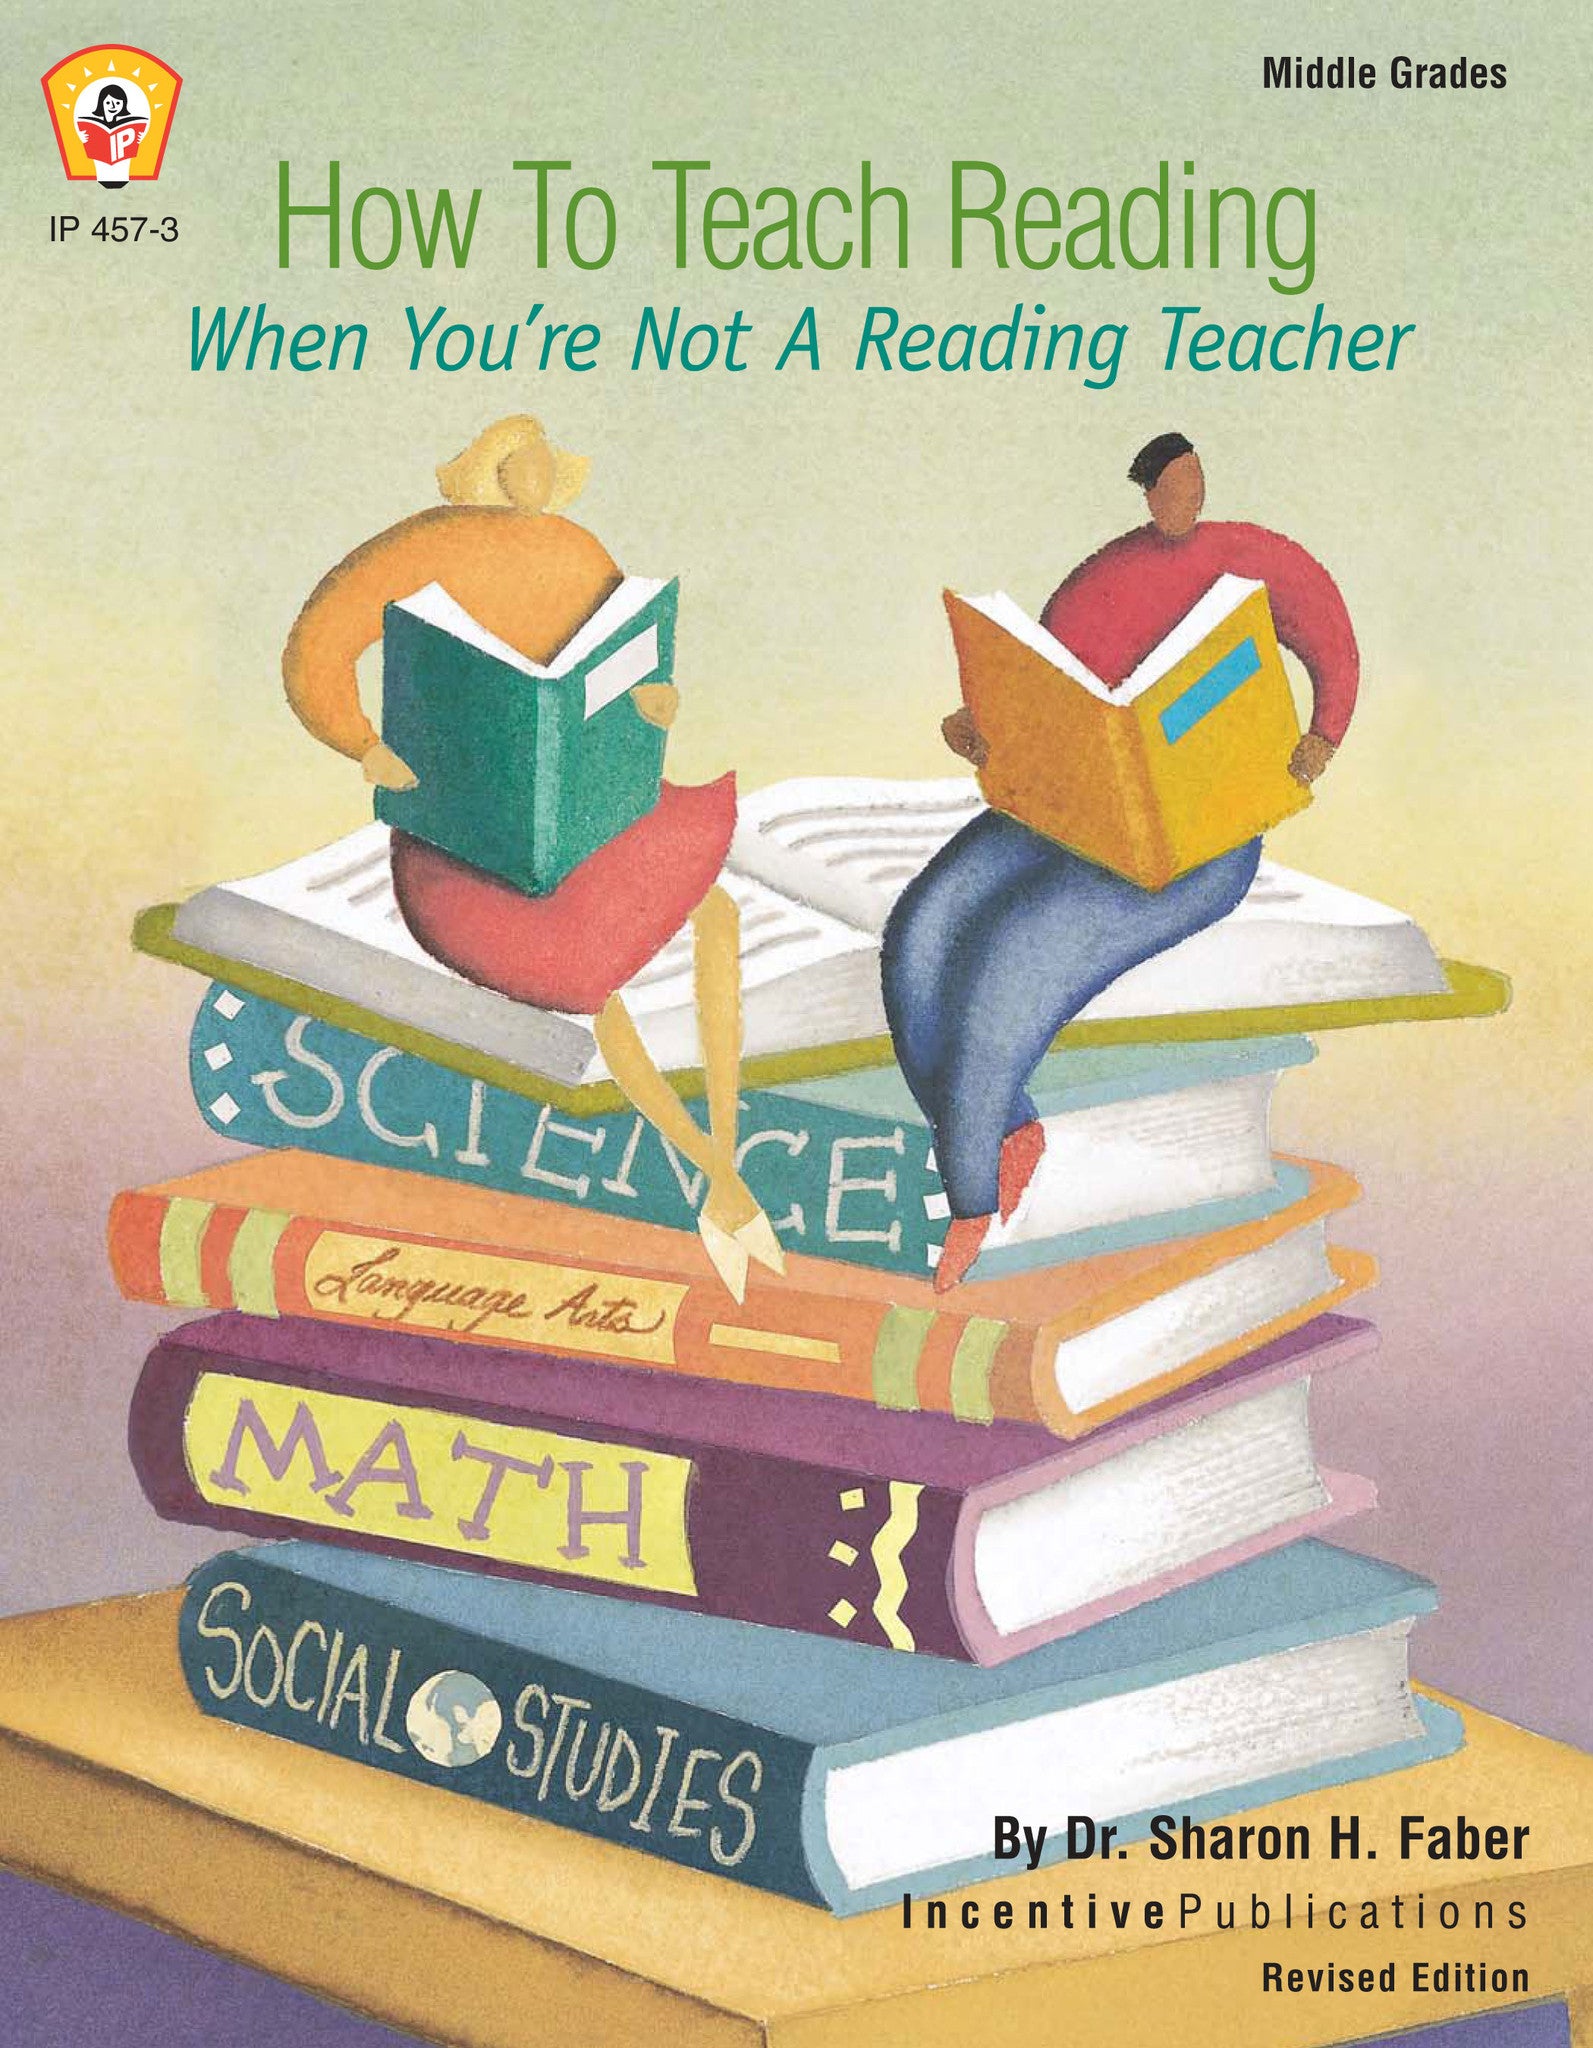 I m not reading these books. How to teach reading. Method teaching of reading for Kids. How to teach reading book. How to teach reading effectively..